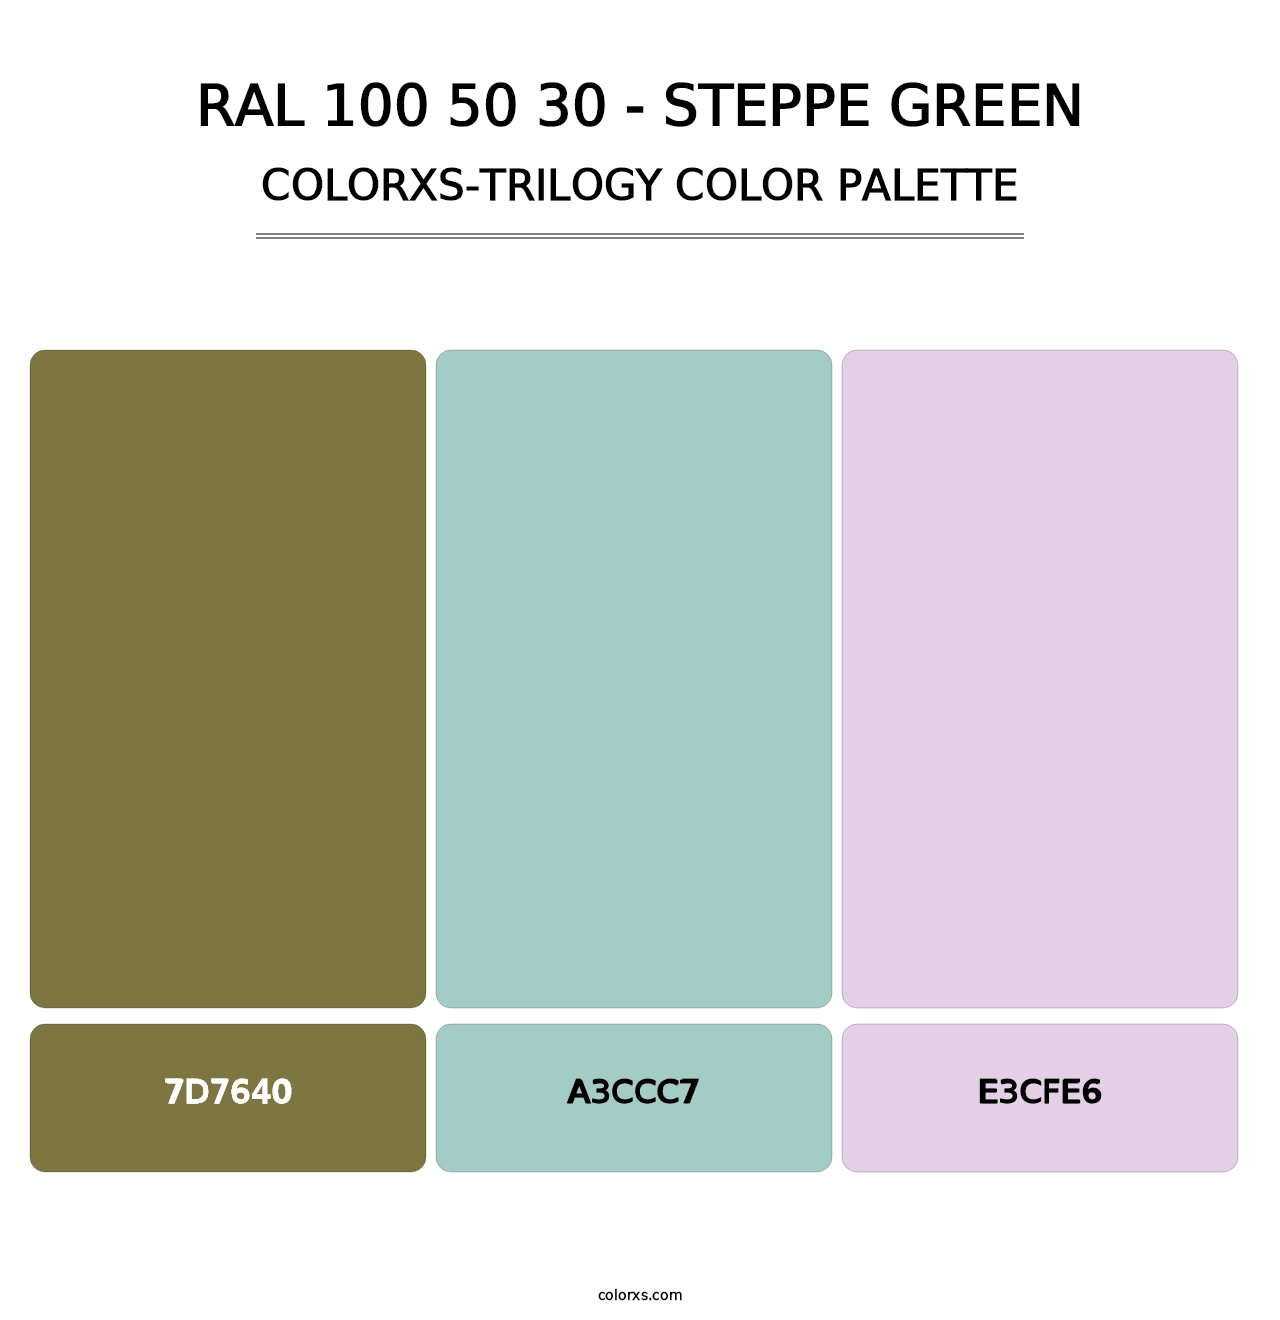 RAL 100 50 30 - Steppe Green - Colorxs Trilogy Palette